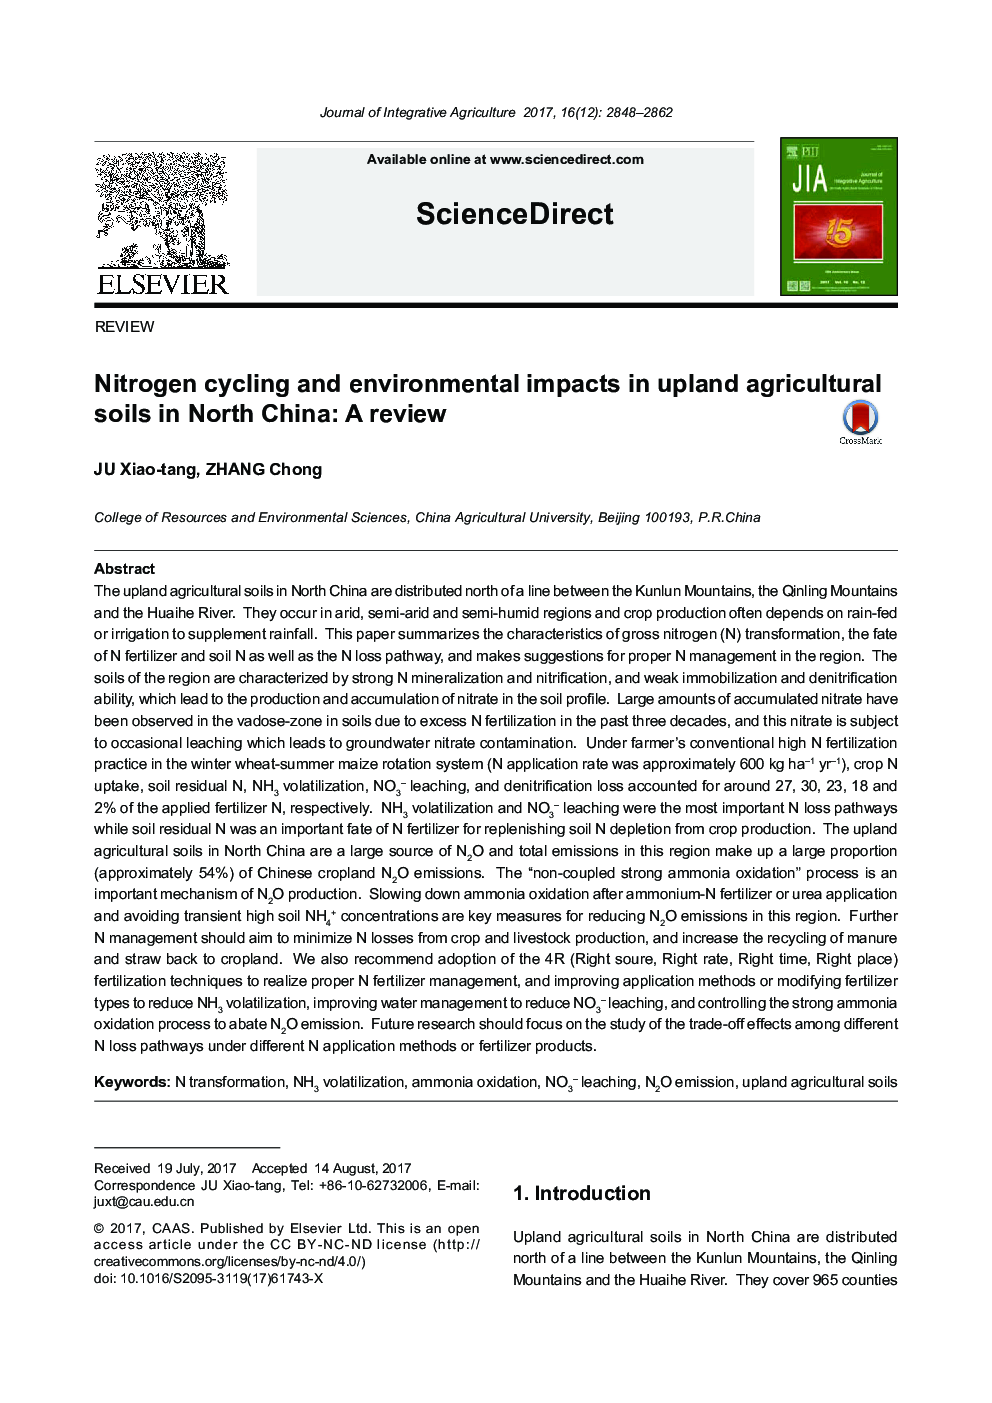 Nitrogen cycling and environmental impacts in upland agricultural soils in North China: A review